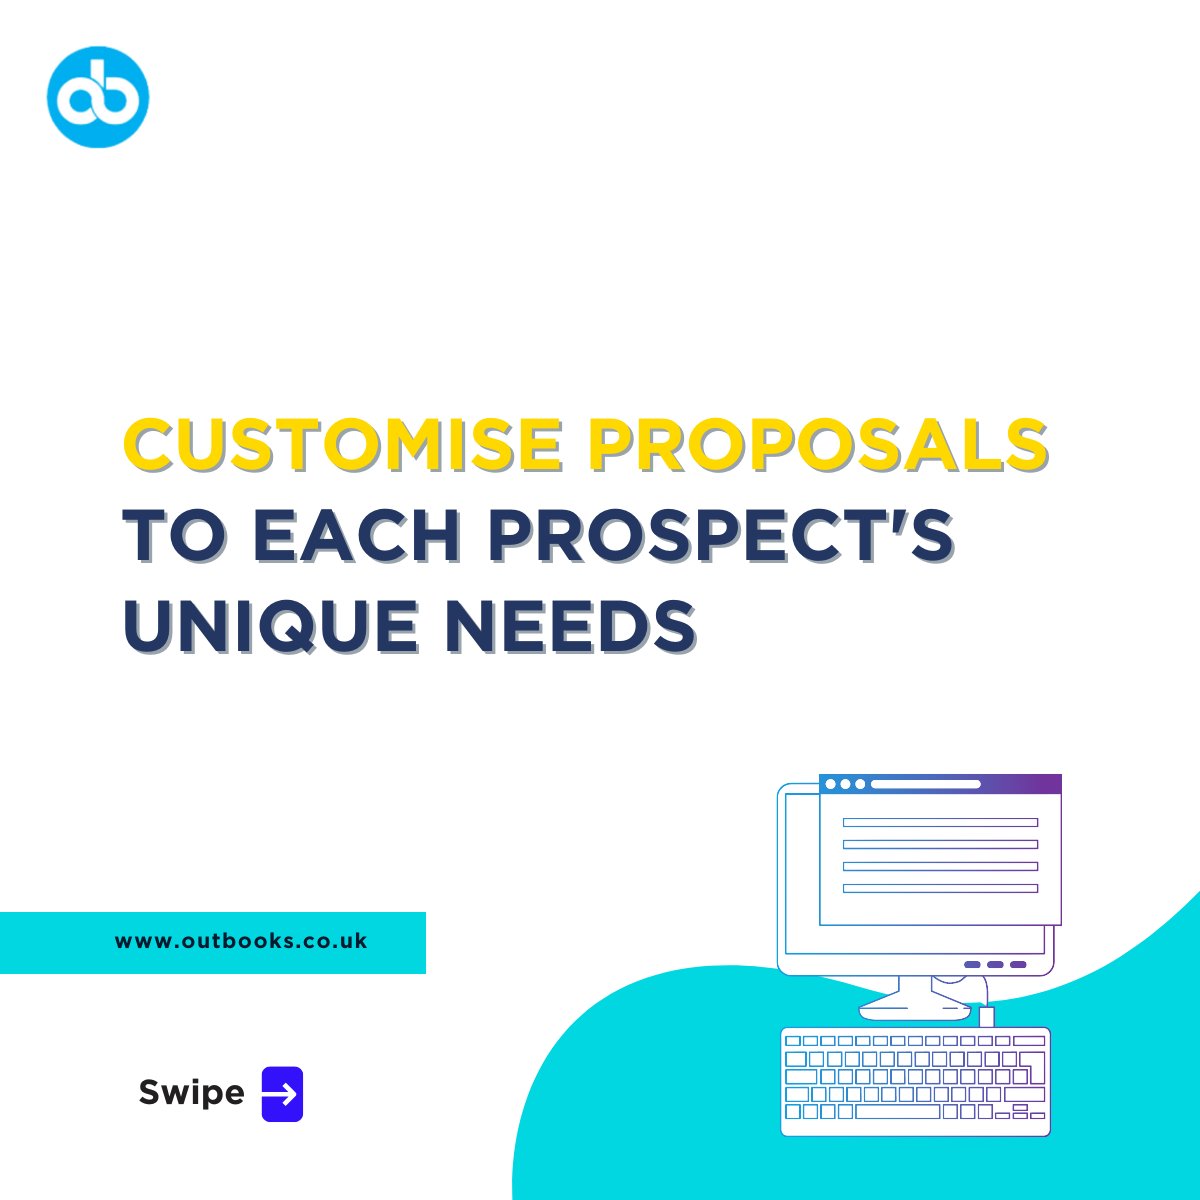 Ready to captivate prospects and skyrocket your accounting proposal success? Say goodbye to outdated proposals and hello to the future of client engagement.

Reach out today to learn more!
proposal.outbooks.com

#AccountingProposals #WinningClients #FinancialSuccess